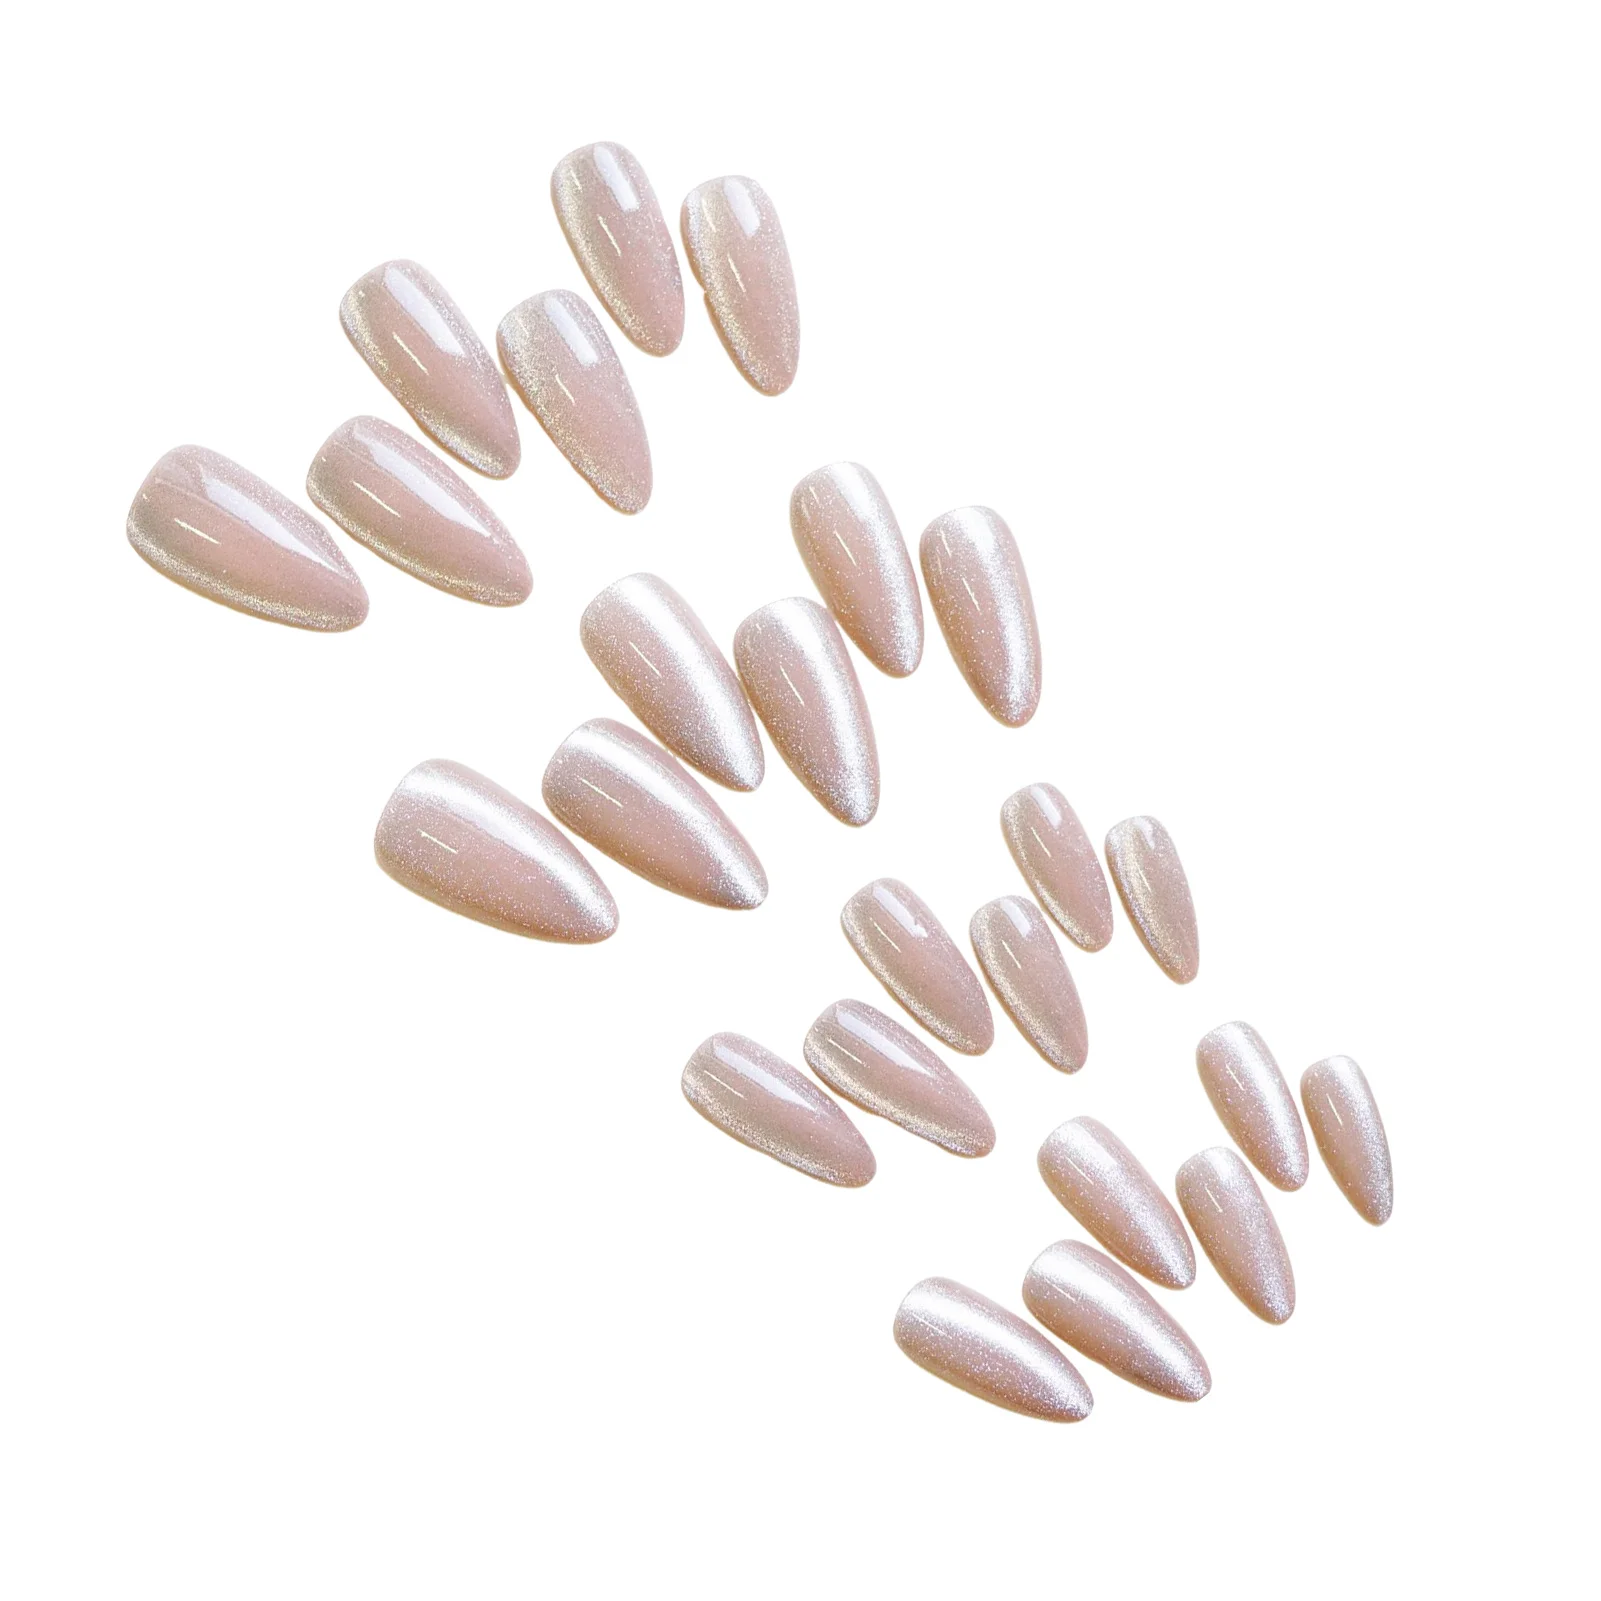 

24pcs Almond False Nail No Fading Long Artificial Nail with Glitters for Women and Girl Nail Salon at Home